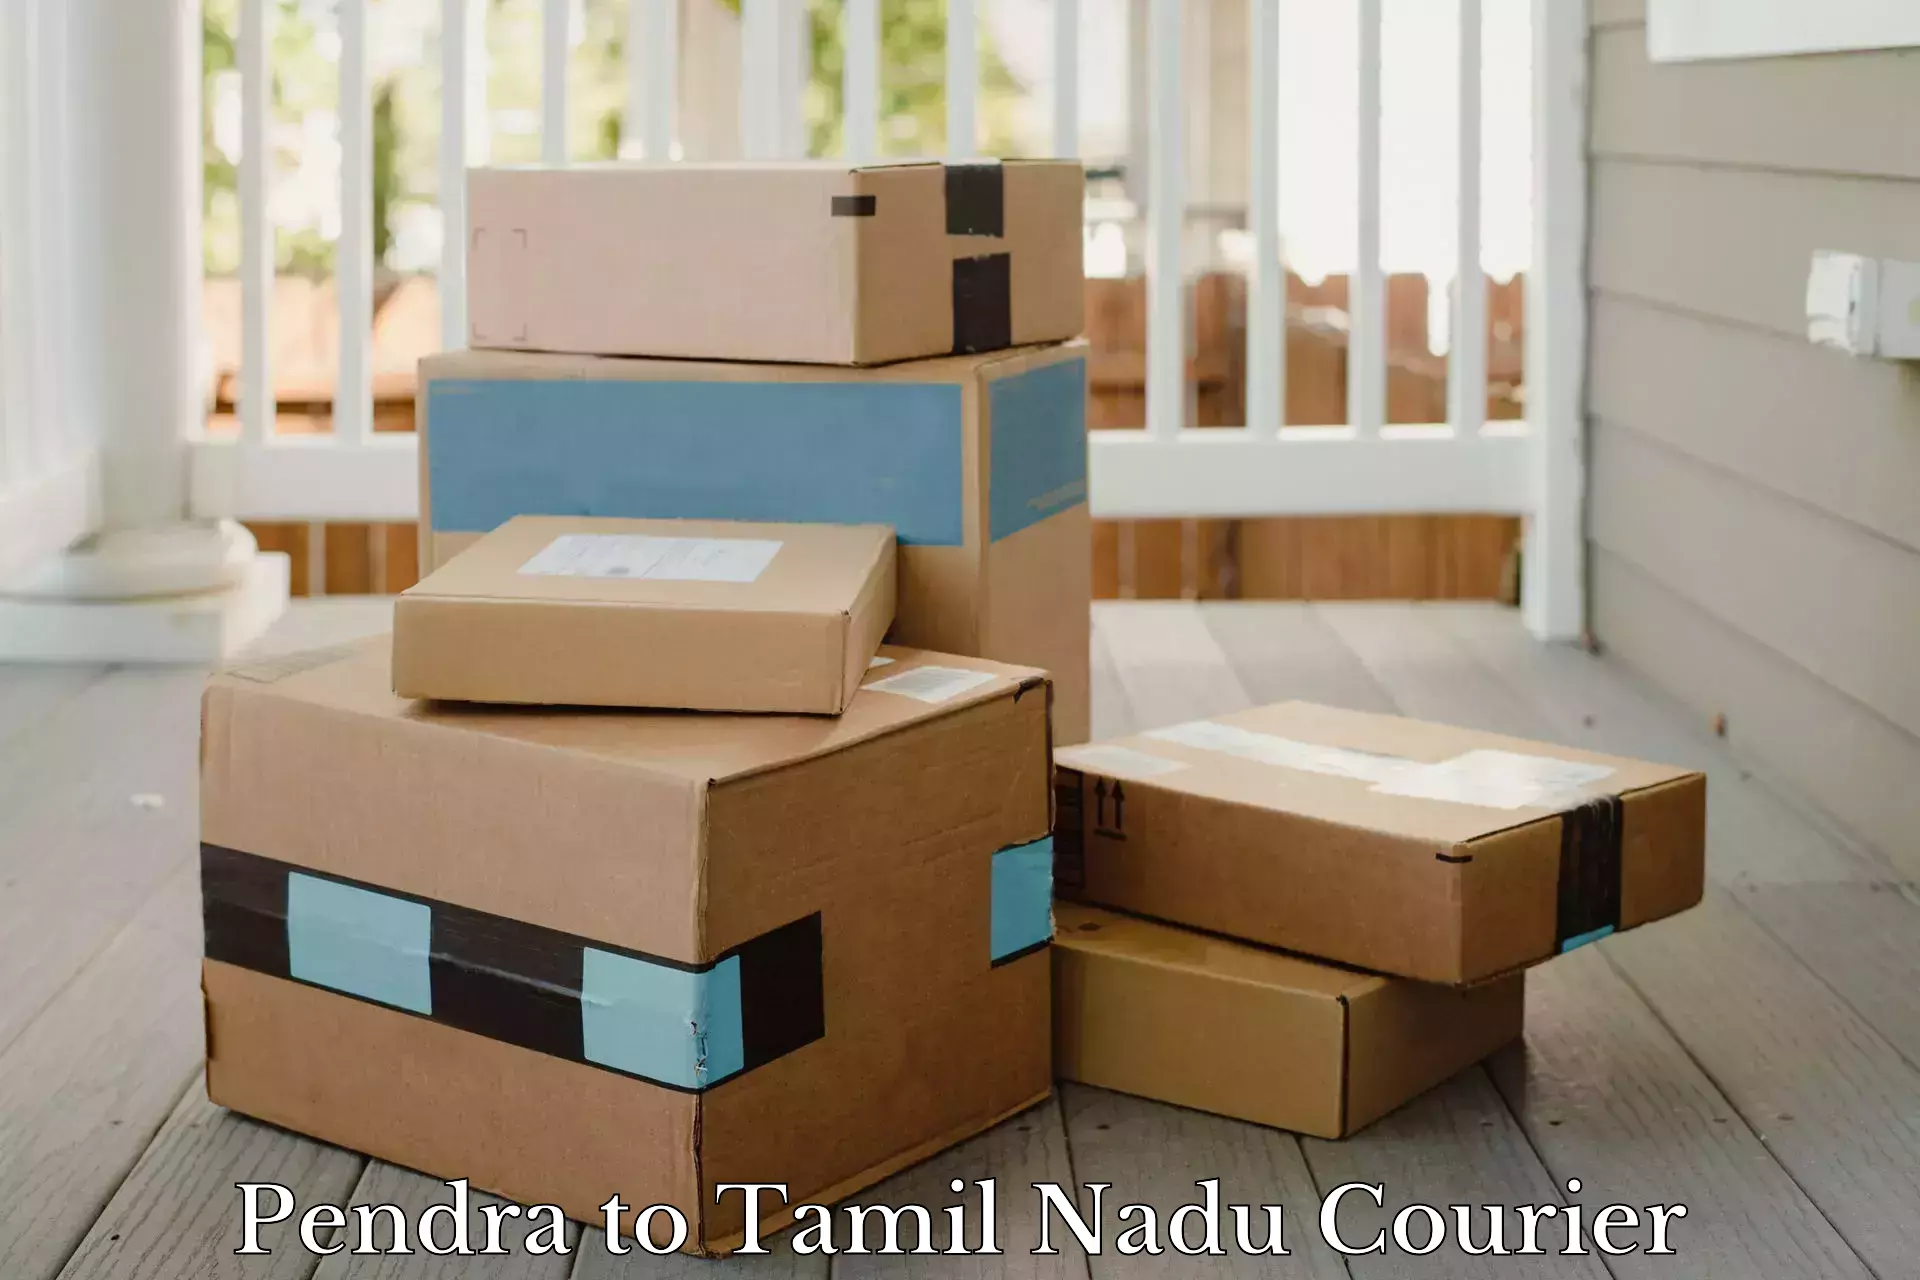 Subscription-based courier Pendra to Tamil Nadu